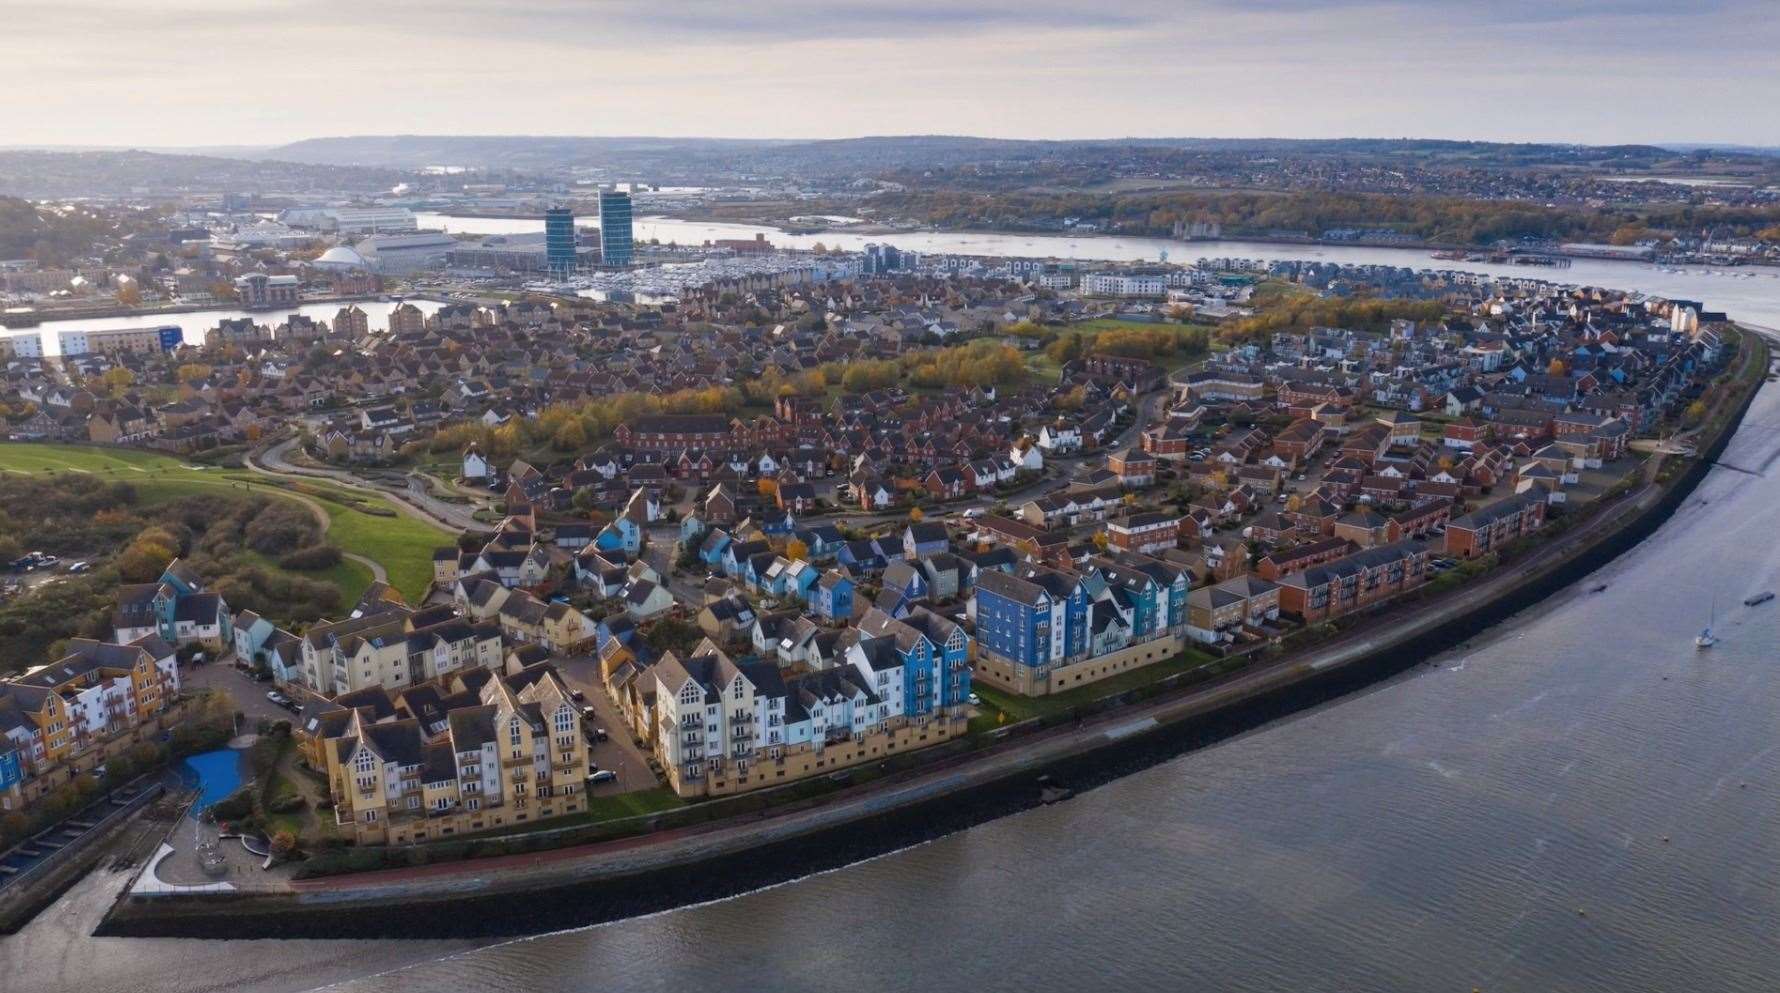 St Mary's Island has seen huge changes in the last few decades as shown by this picture from Geoff's drone. Picture: Geoff Watkins